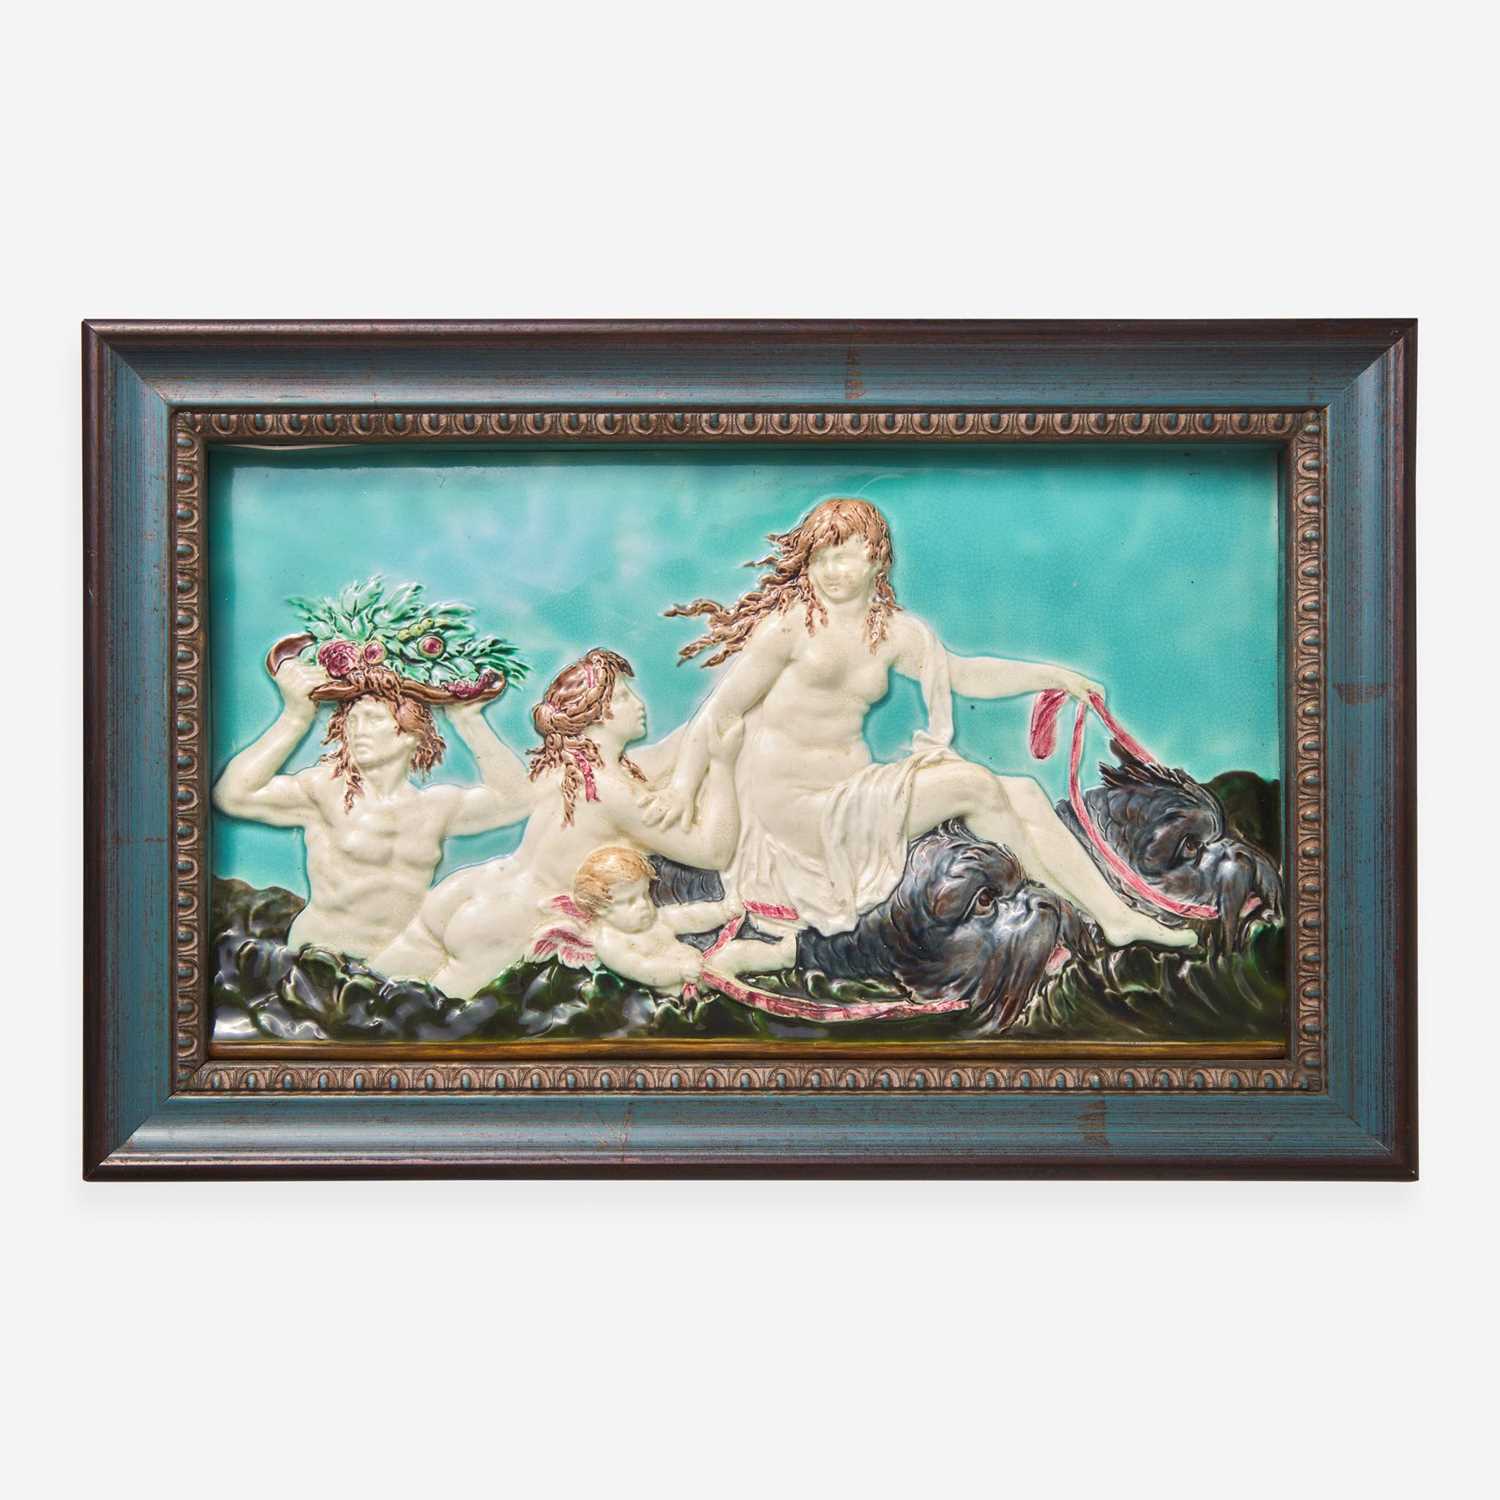 Lot 105 - A Wedgwood Majolica "Sea Nymph Riding Dolphins" Plaque After Clodion (1738-1814)